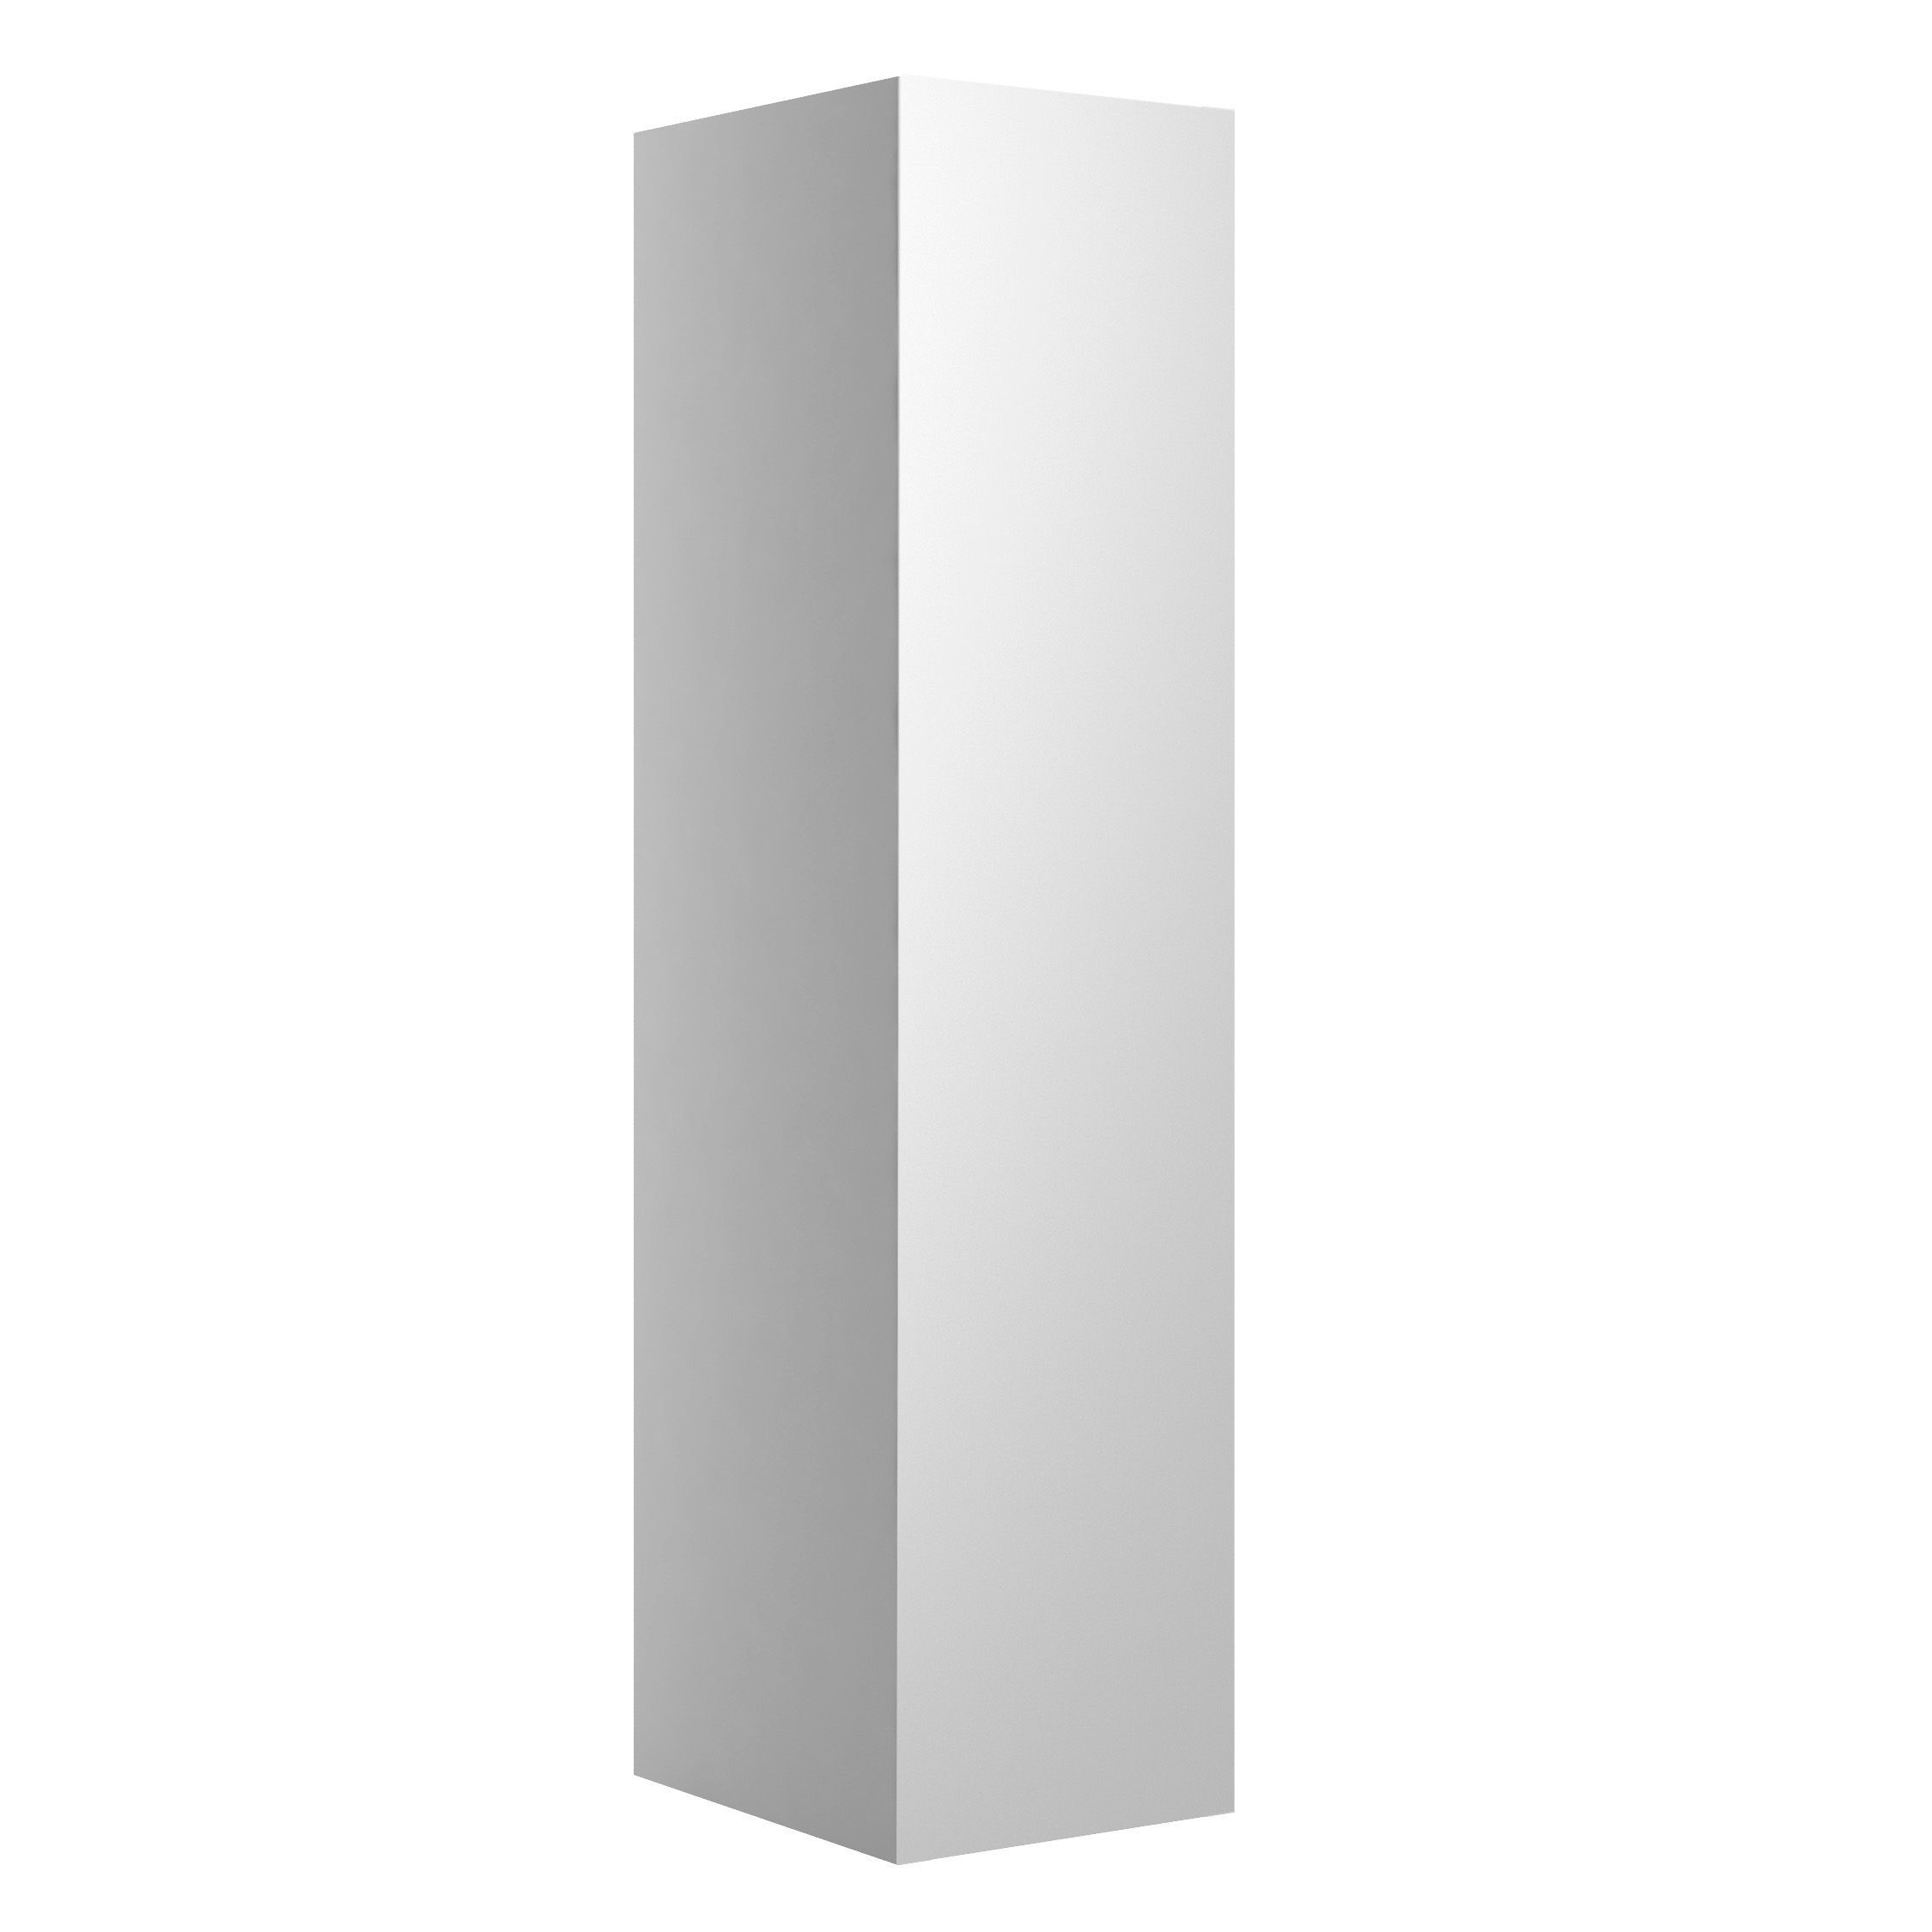 Cooke & Lewis Santini Gloss White Single Wall Cabinet (W)160mm (H)672mm